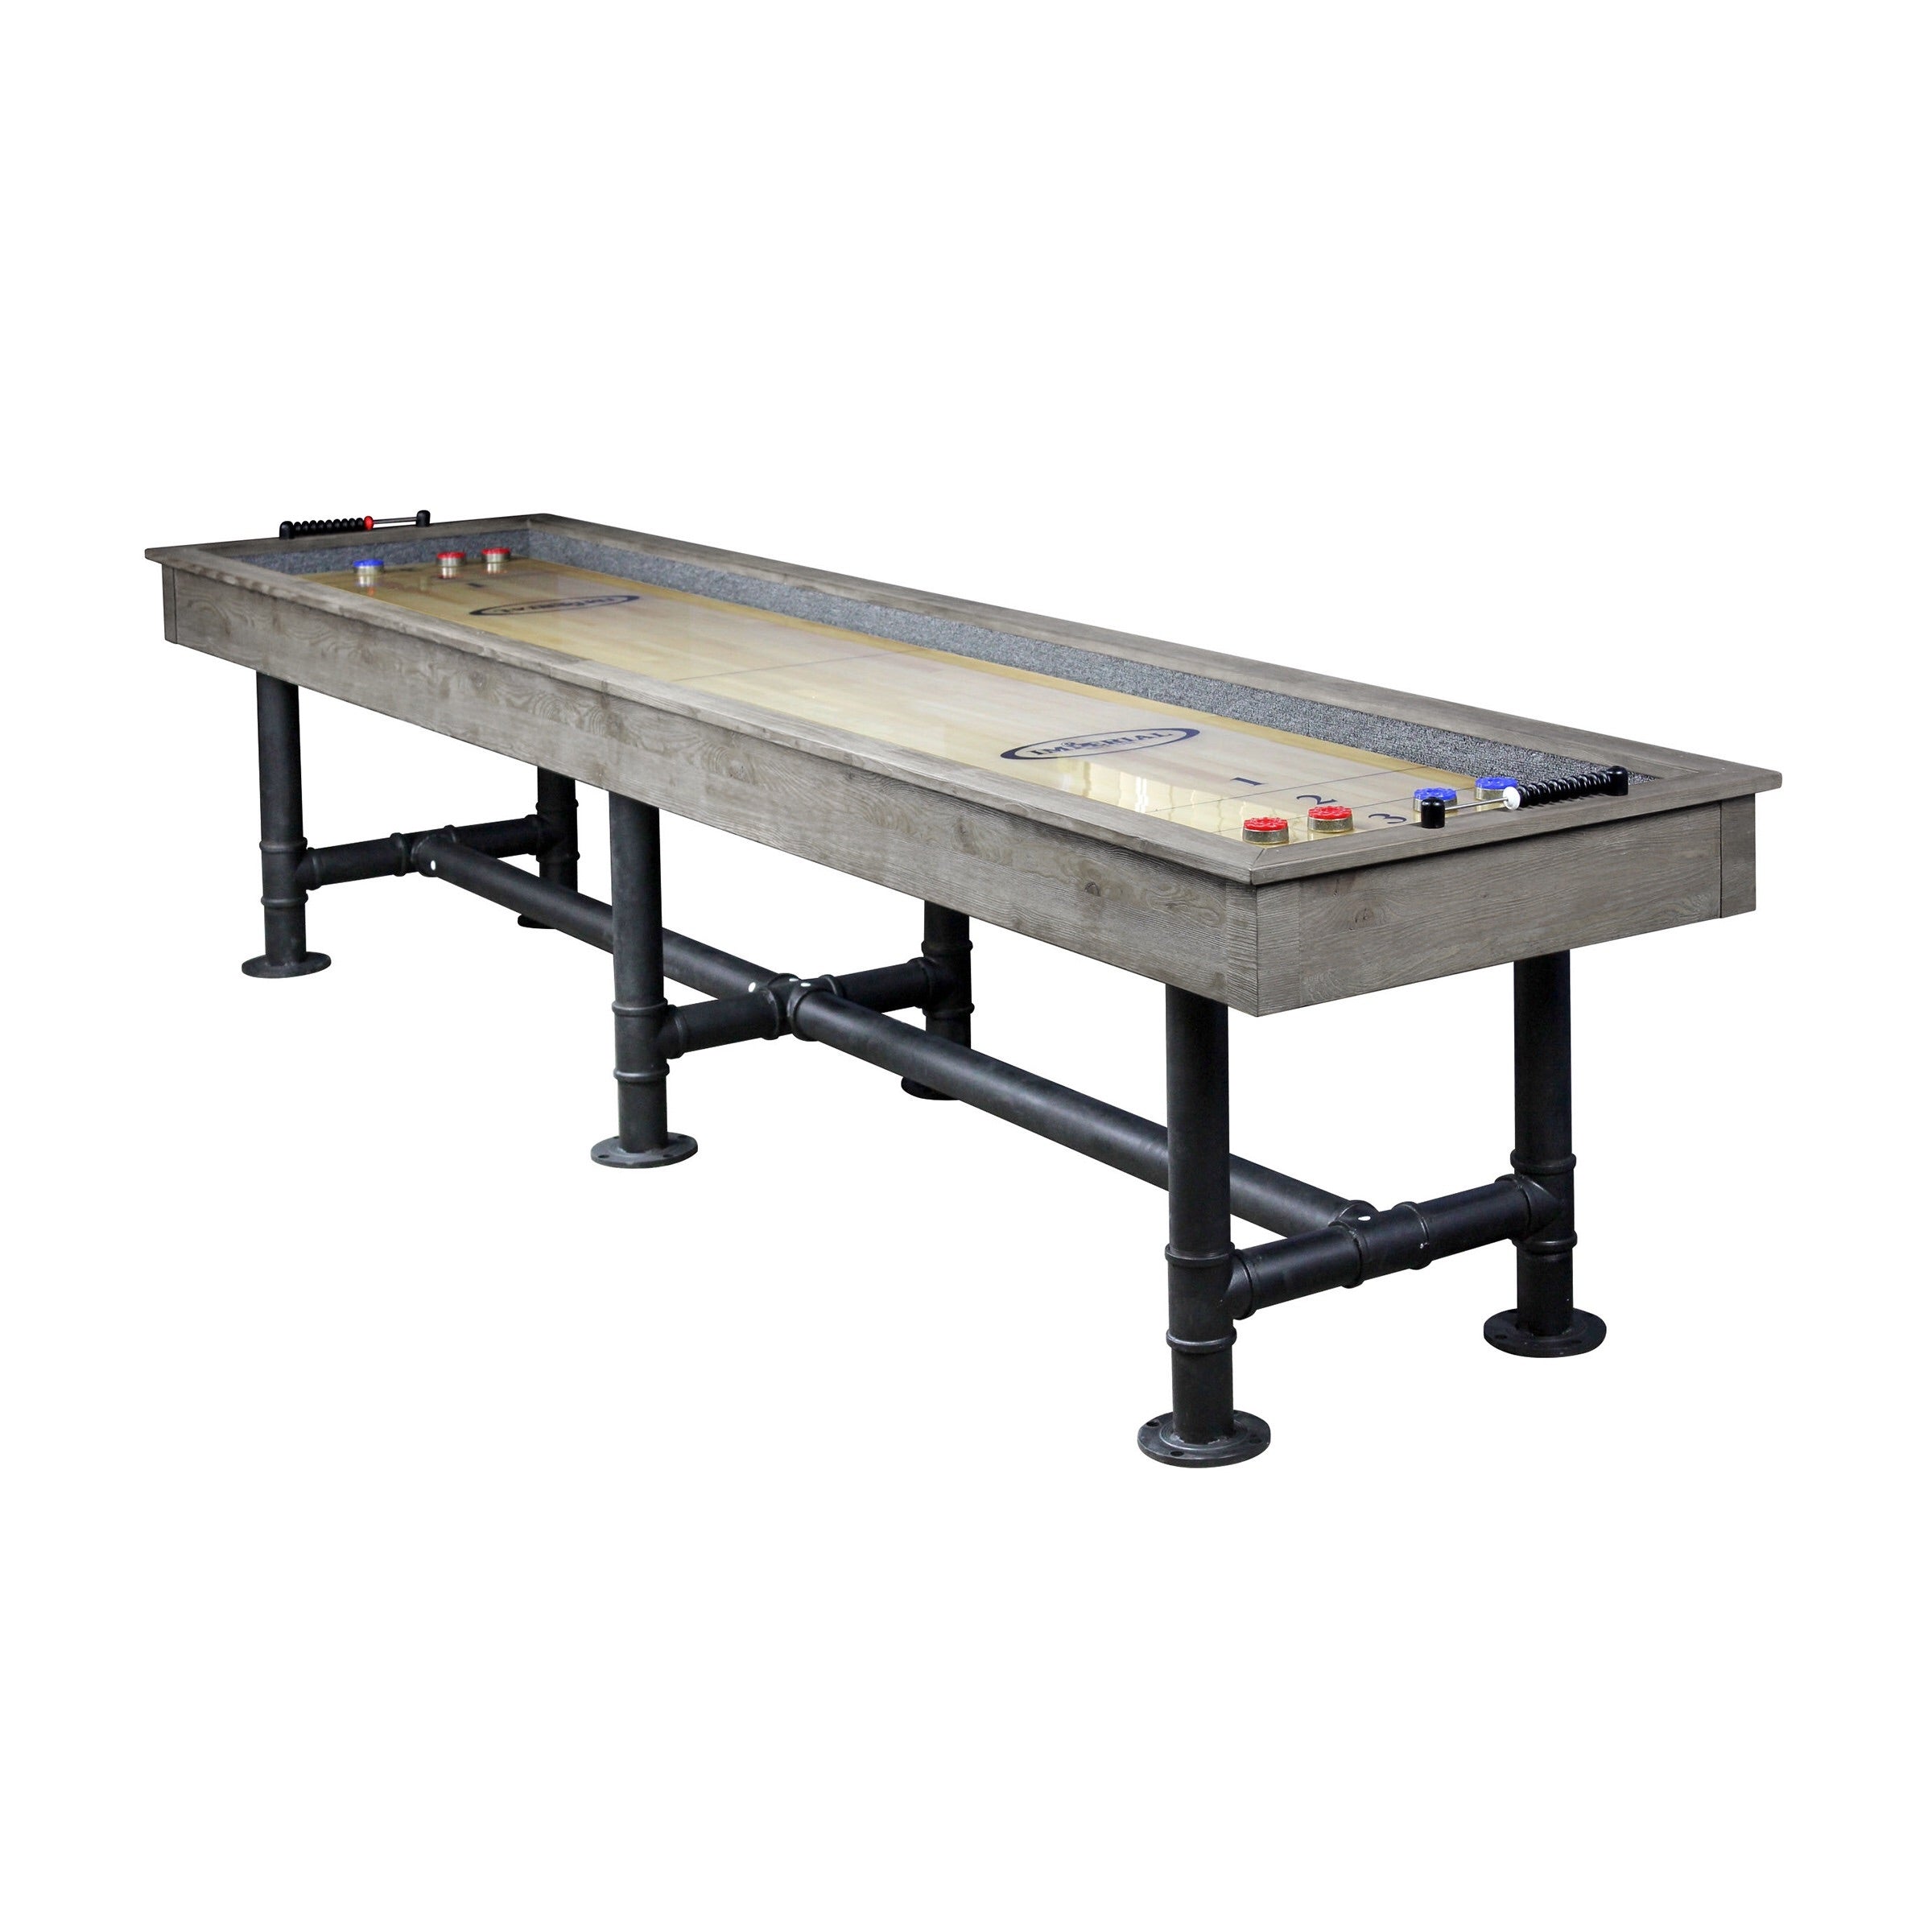 Imperial Shuffleboard Table - Silver Mist Bedford 12 ft